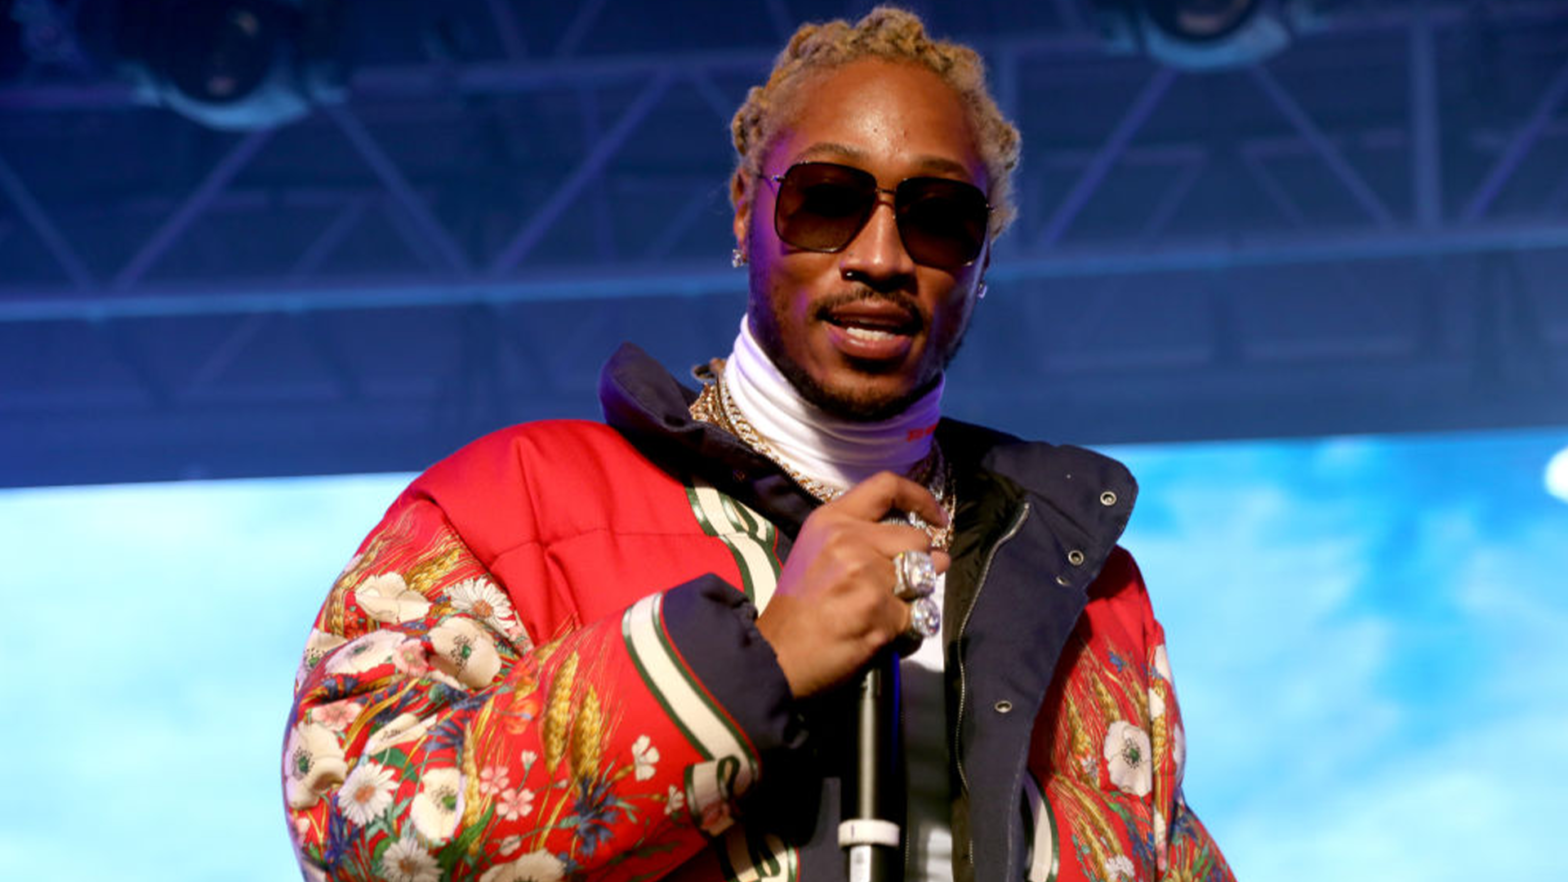 With An Estimated $40M Net Worth, Future Reflects On What's To Come — 'Billions, That’s How It’s Looking'